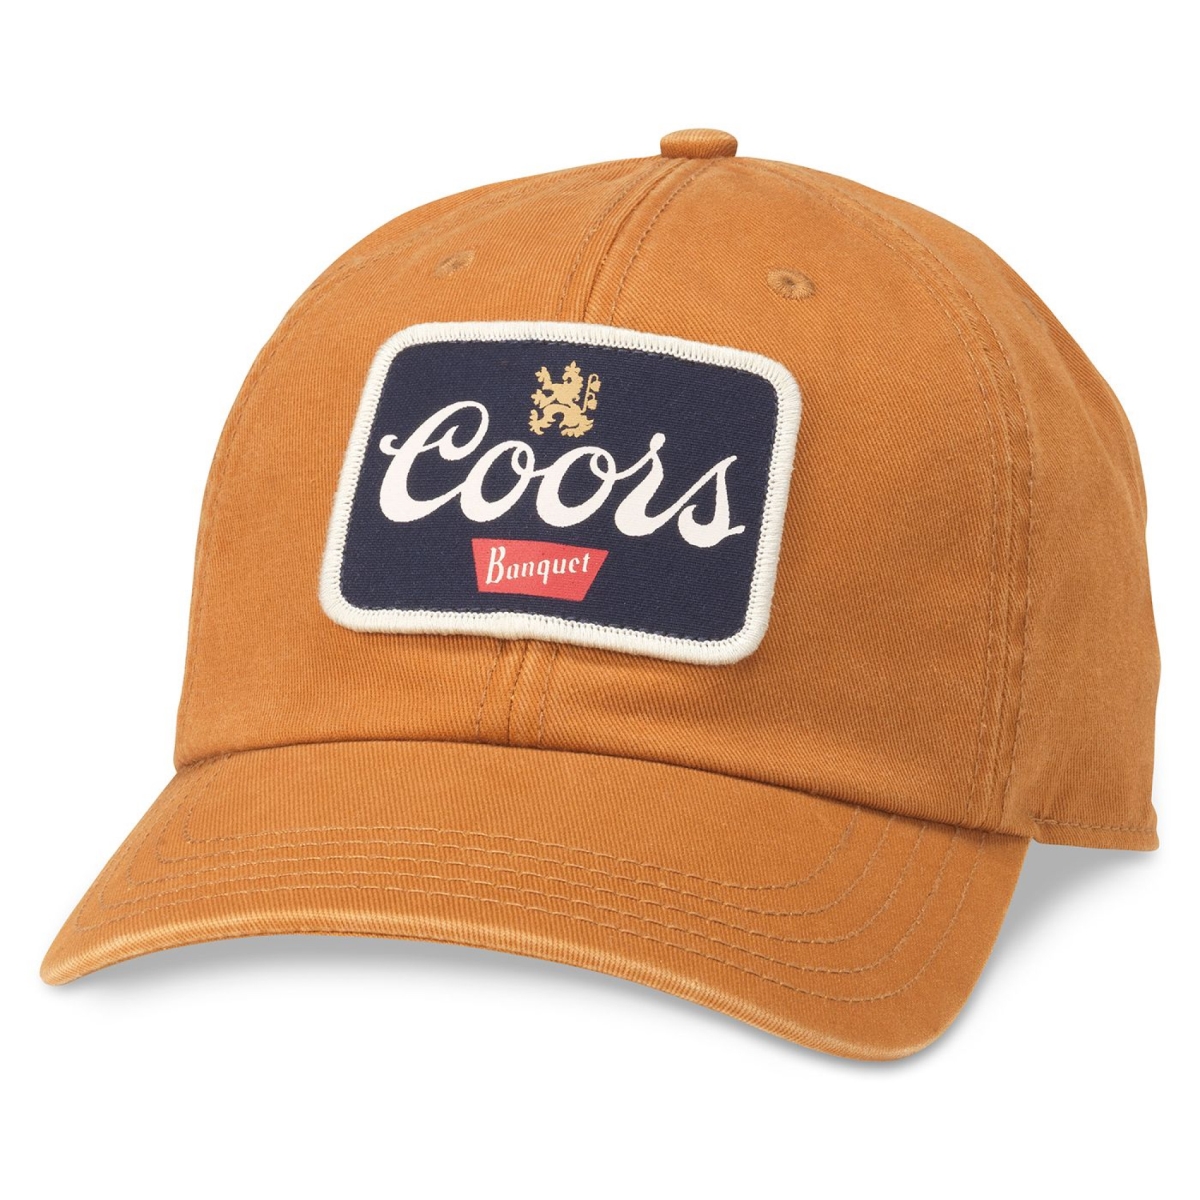 Picture of Coors 834836 Coors Banquet Logo Patch Adjustable Hat